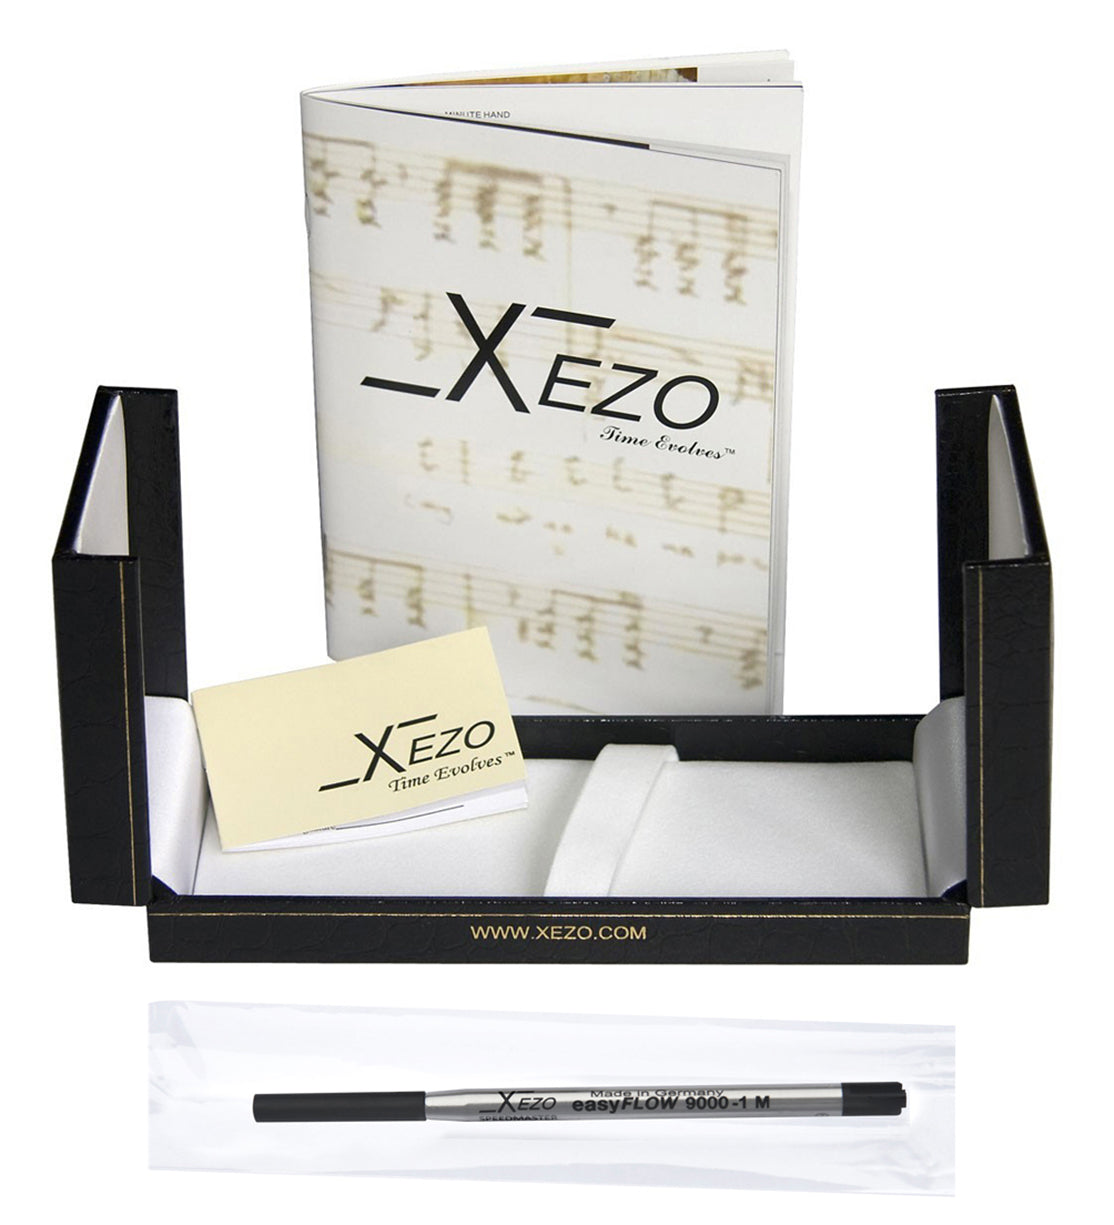 Xezo - Black gift box, certificate, manual, and ink cartridge of the Maestro White MOP B ballpoint pen